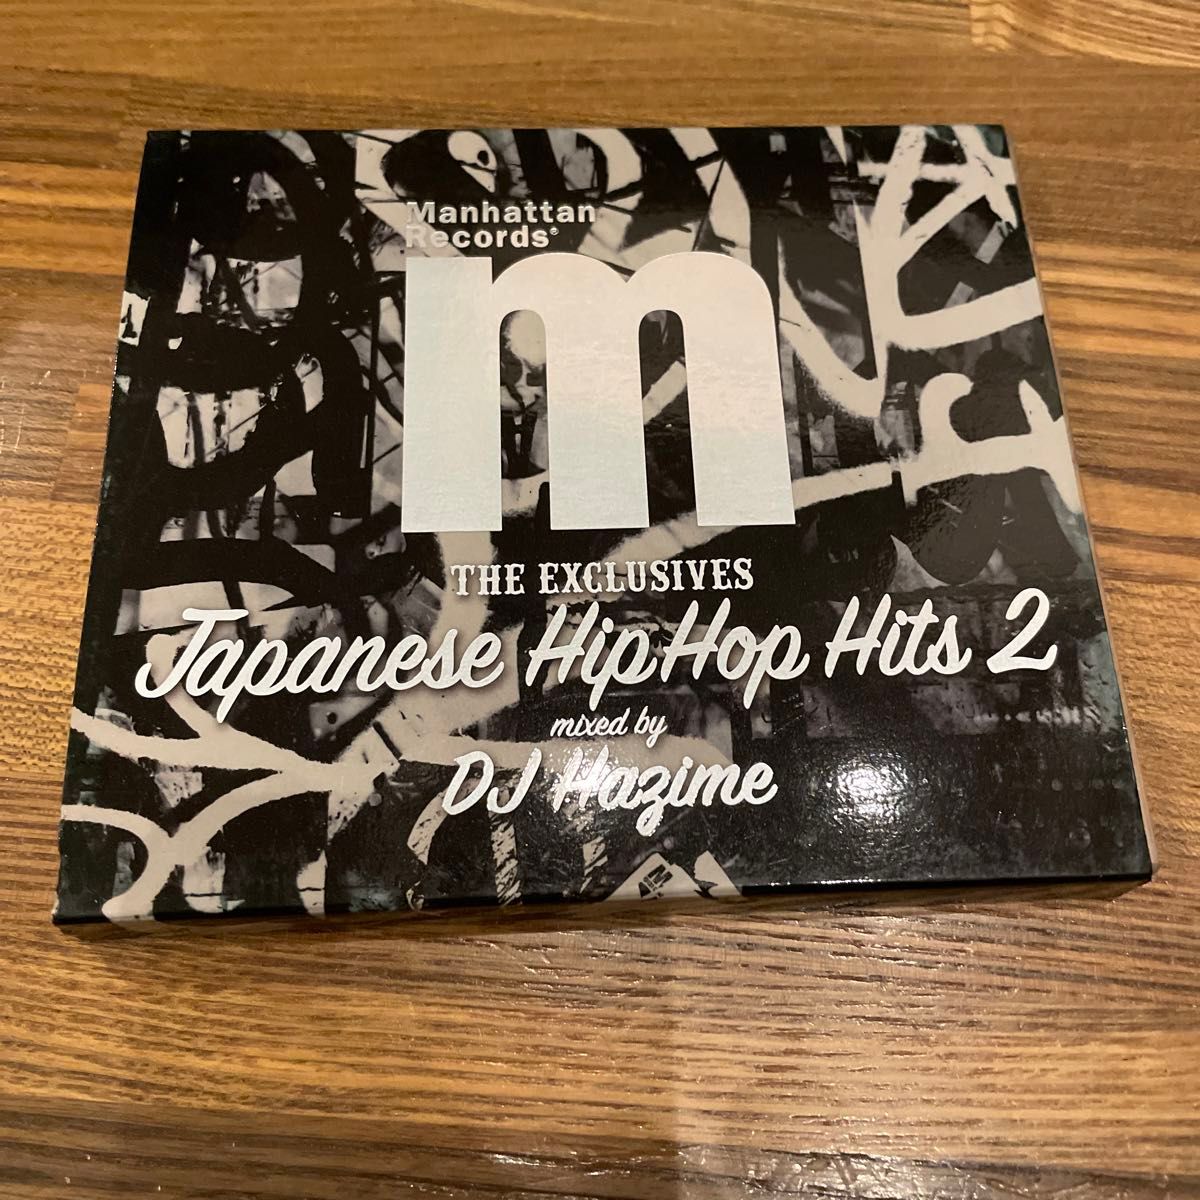 THE EXCLUSIVES Japanese Hip Hop Hits 2 mixed by Dj Hazime